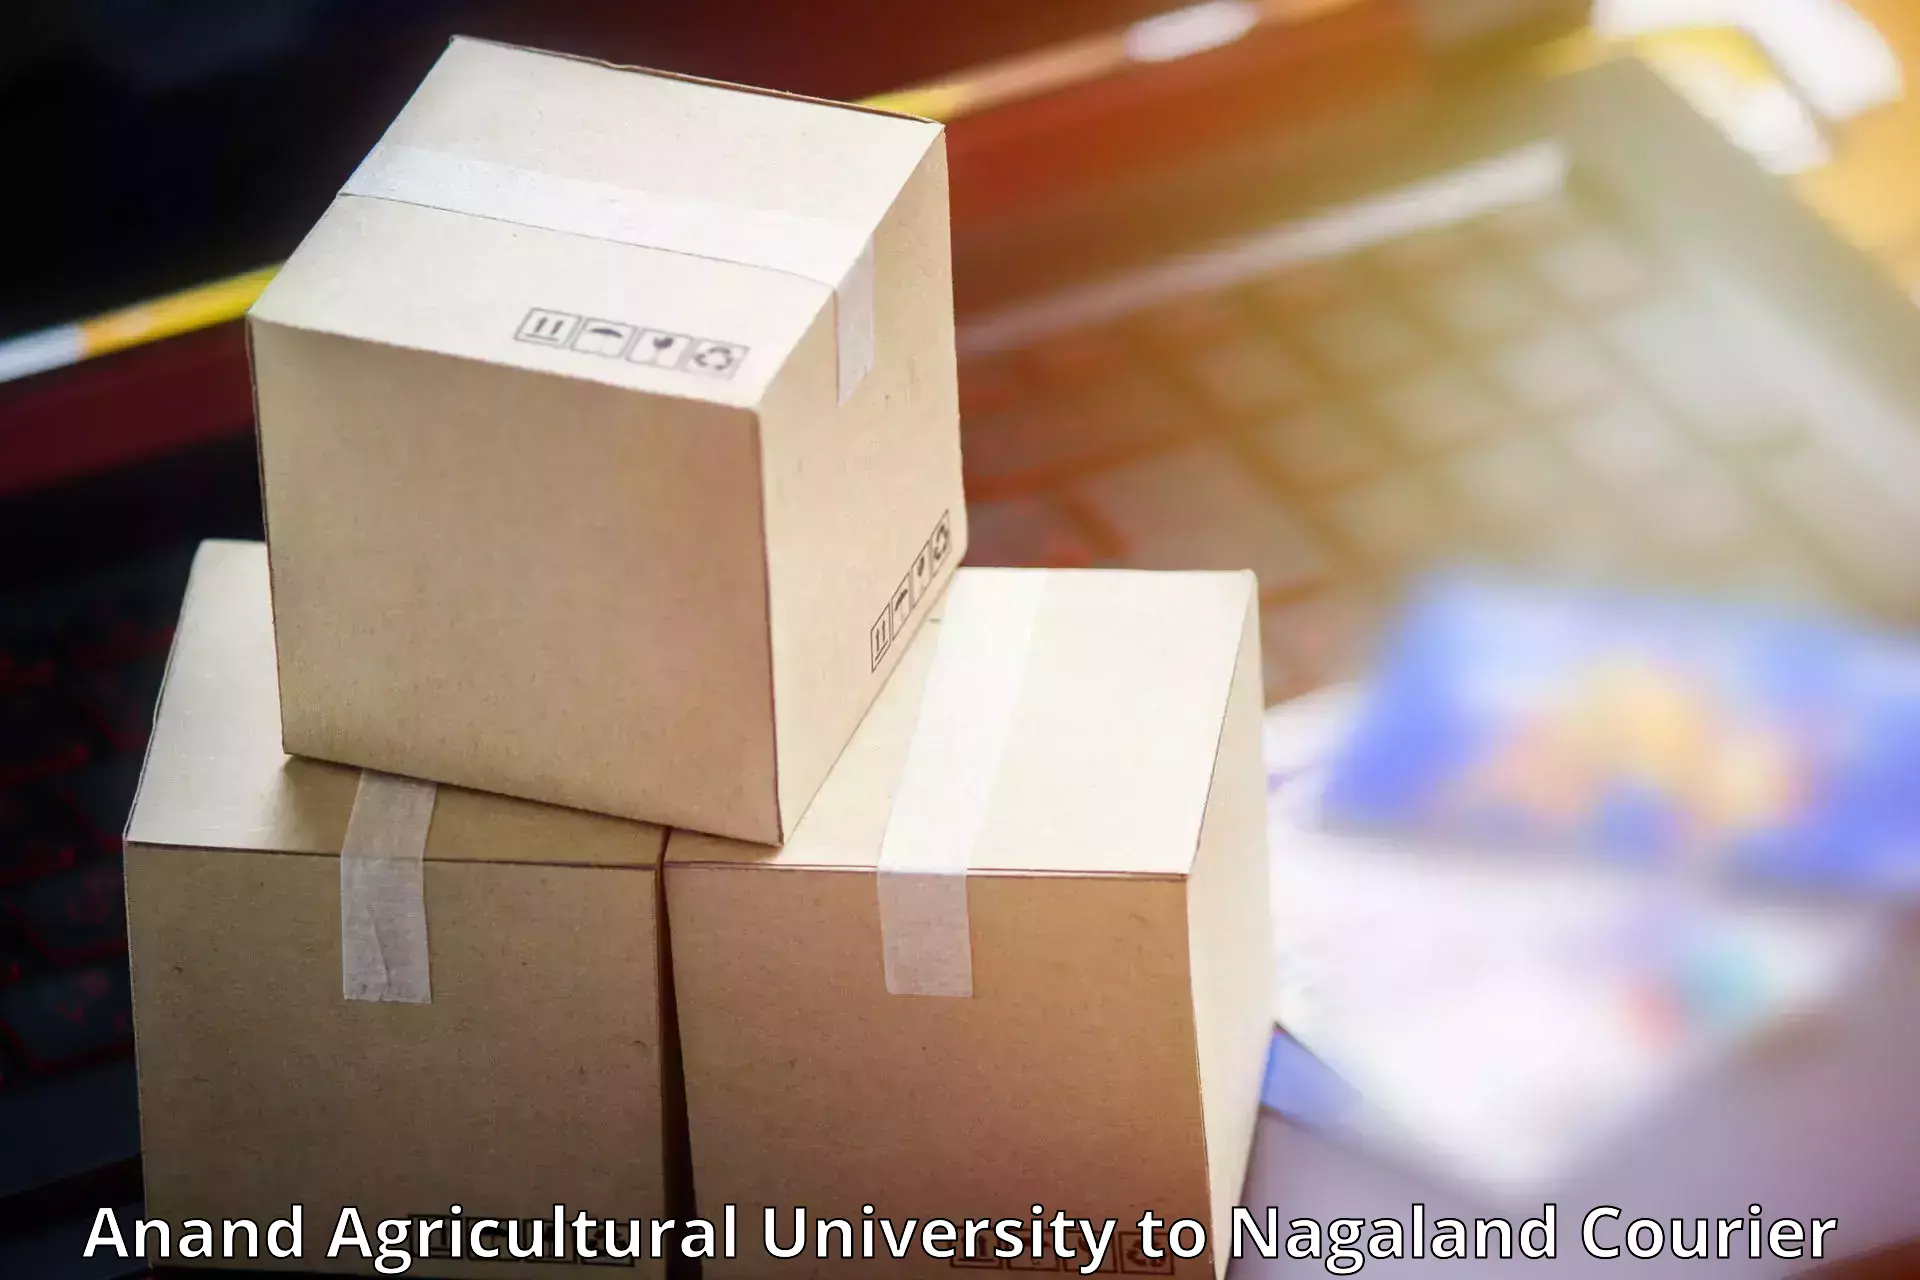 On-call courier service Anand Agricultural University to Dimapur